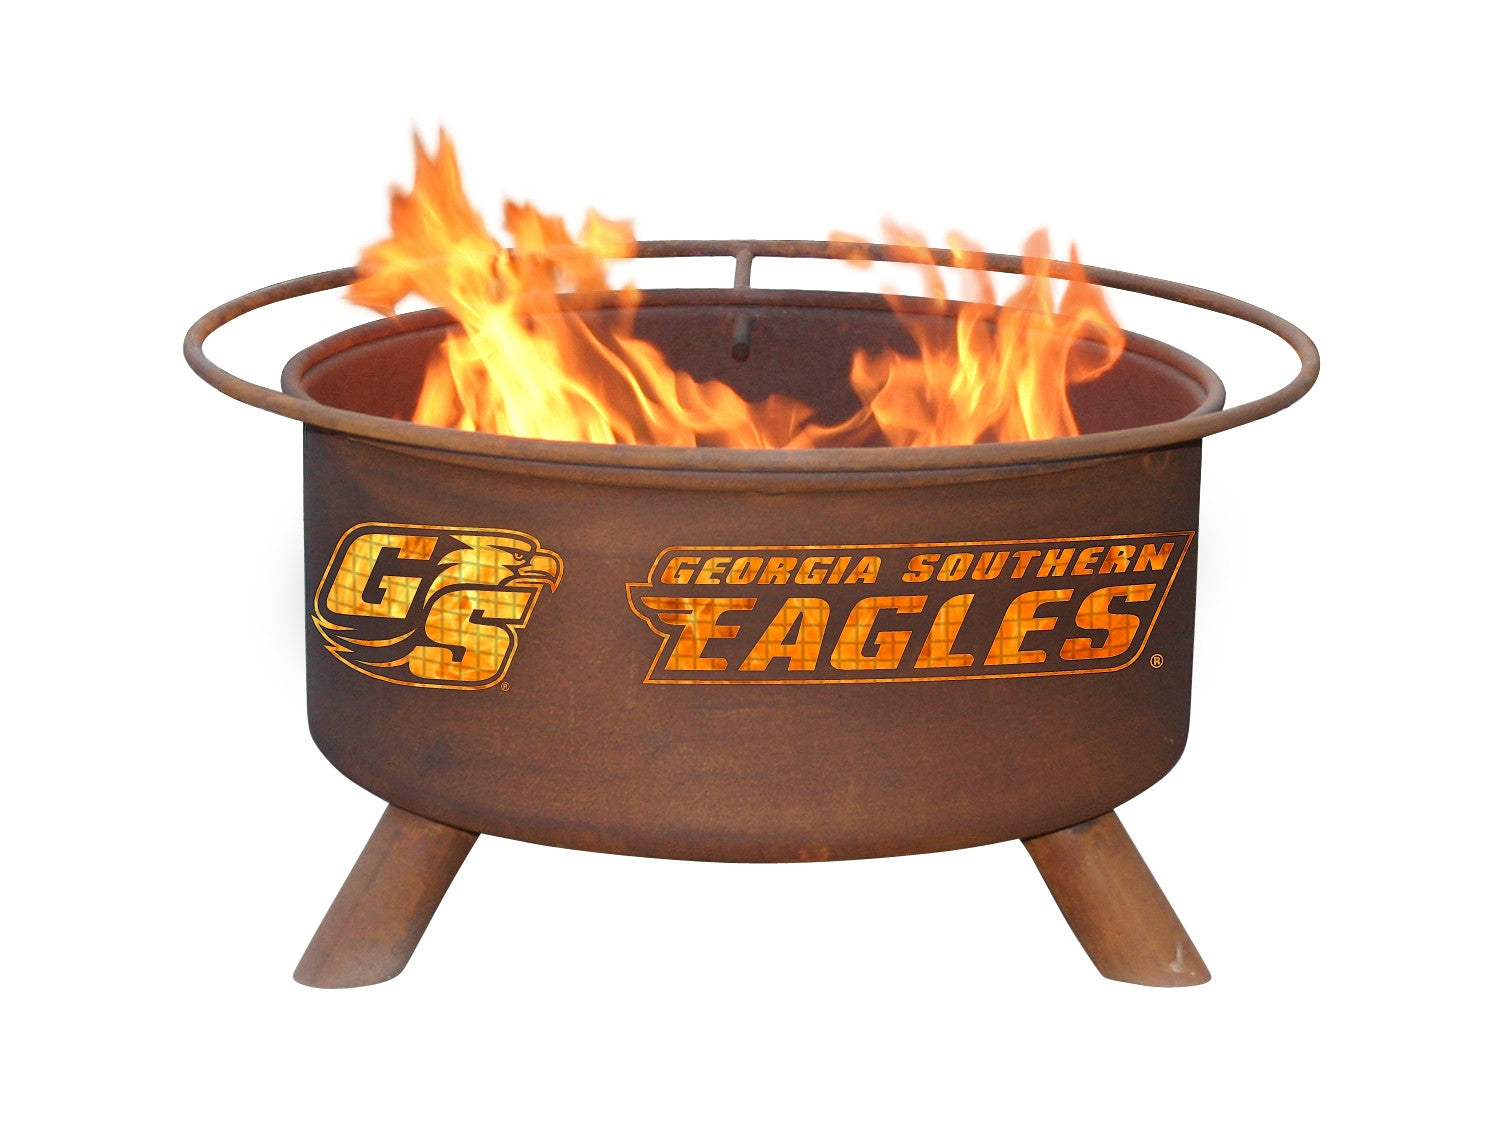 Collegiate Georgia Southern University Logo Wood and Charcoal Steel Fire Pit, Fireplace - Yardify.com